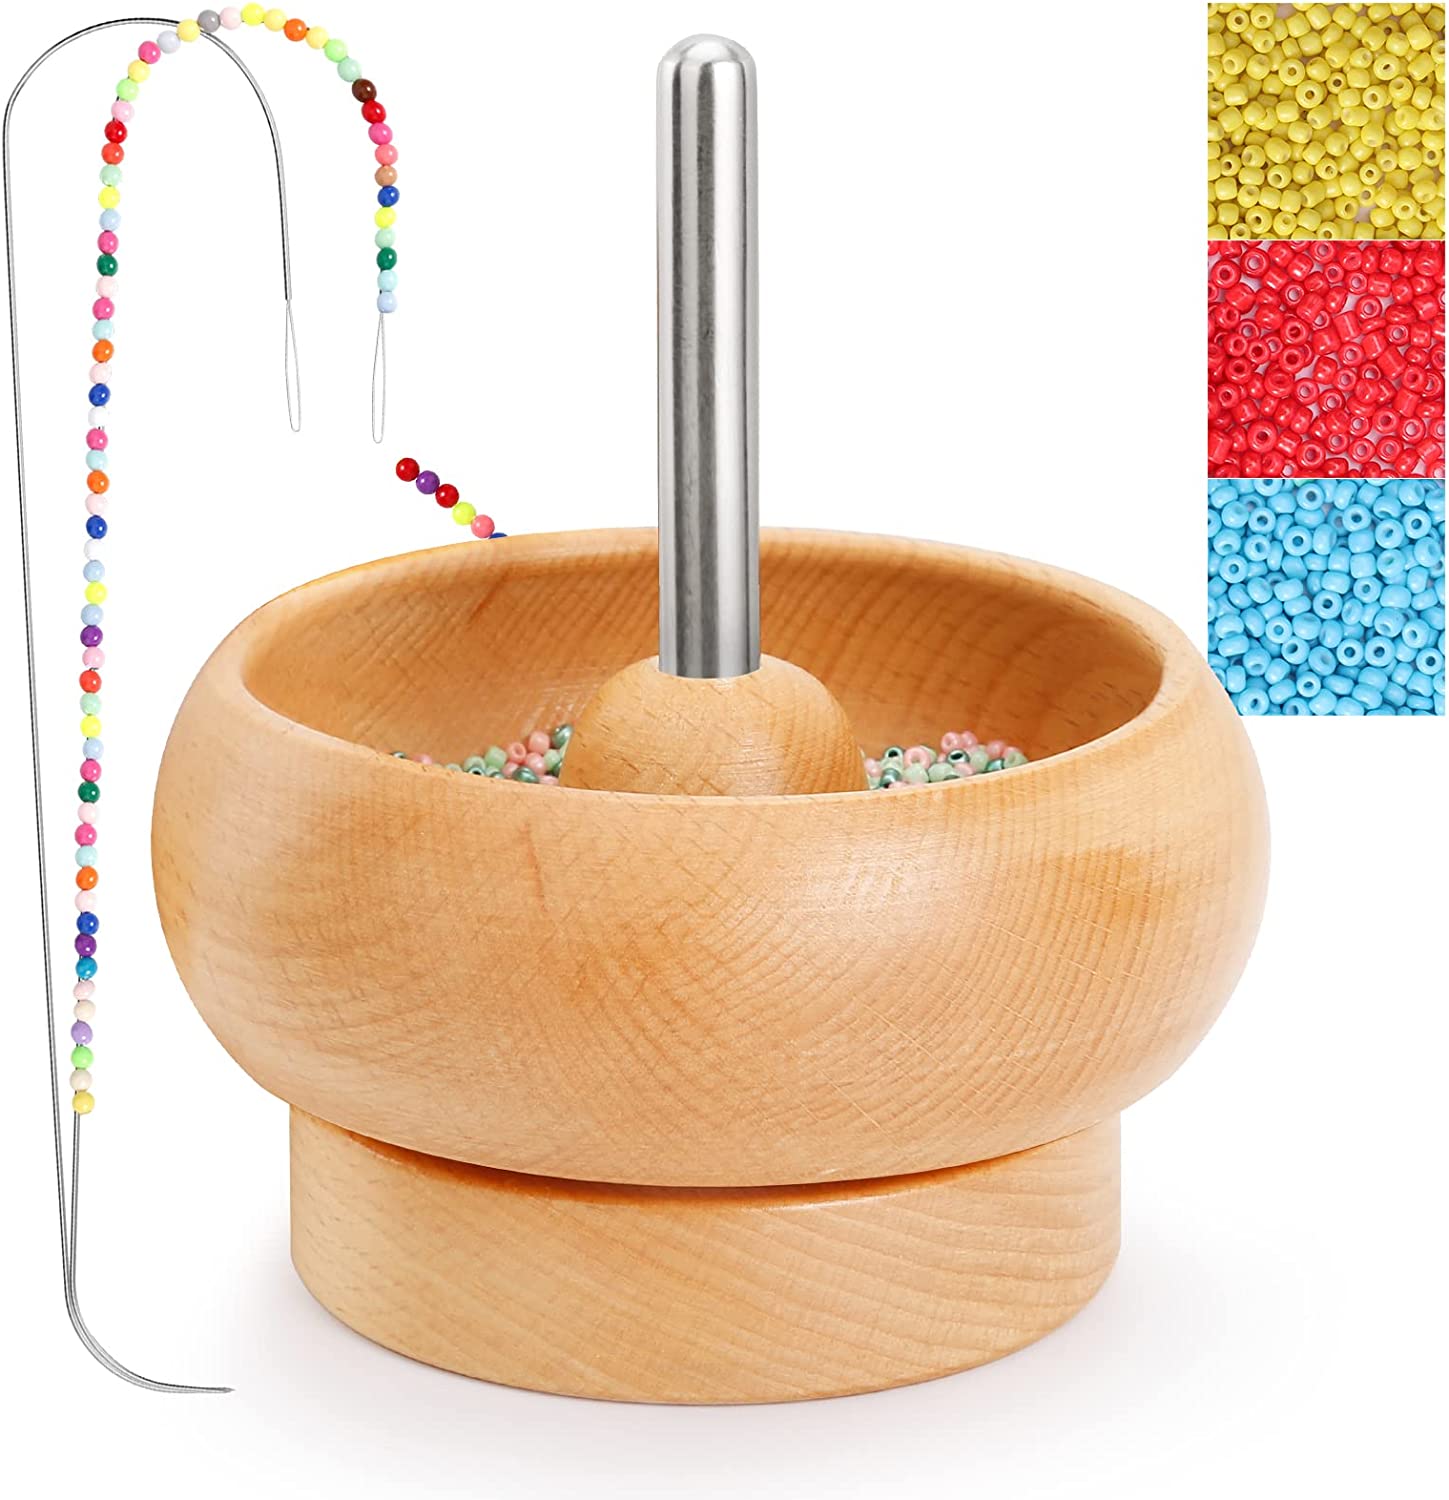 Bead Spinner for Jewelry Making, Wooden Spinning Bead Bowl with 2 Beading  Needle and 3000 Seed Beads for Waist, Bracelets, DIY Seed Beads Crafting  Project 